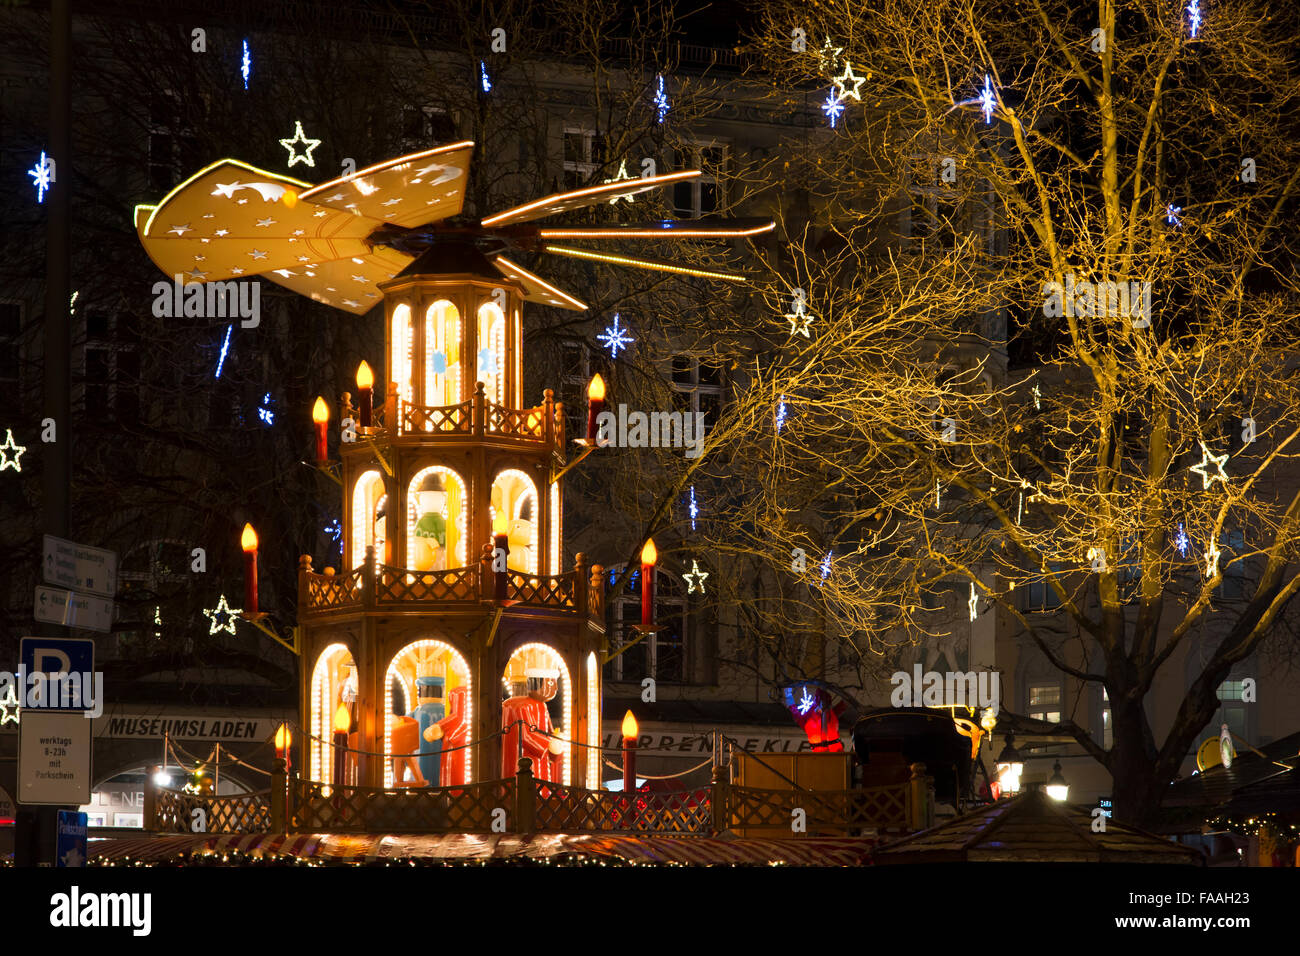 MUNICH, GERMANY - DECEMBER 12: Traditional christmas market at night with a illuminated pyramid in Munich Stock Photo